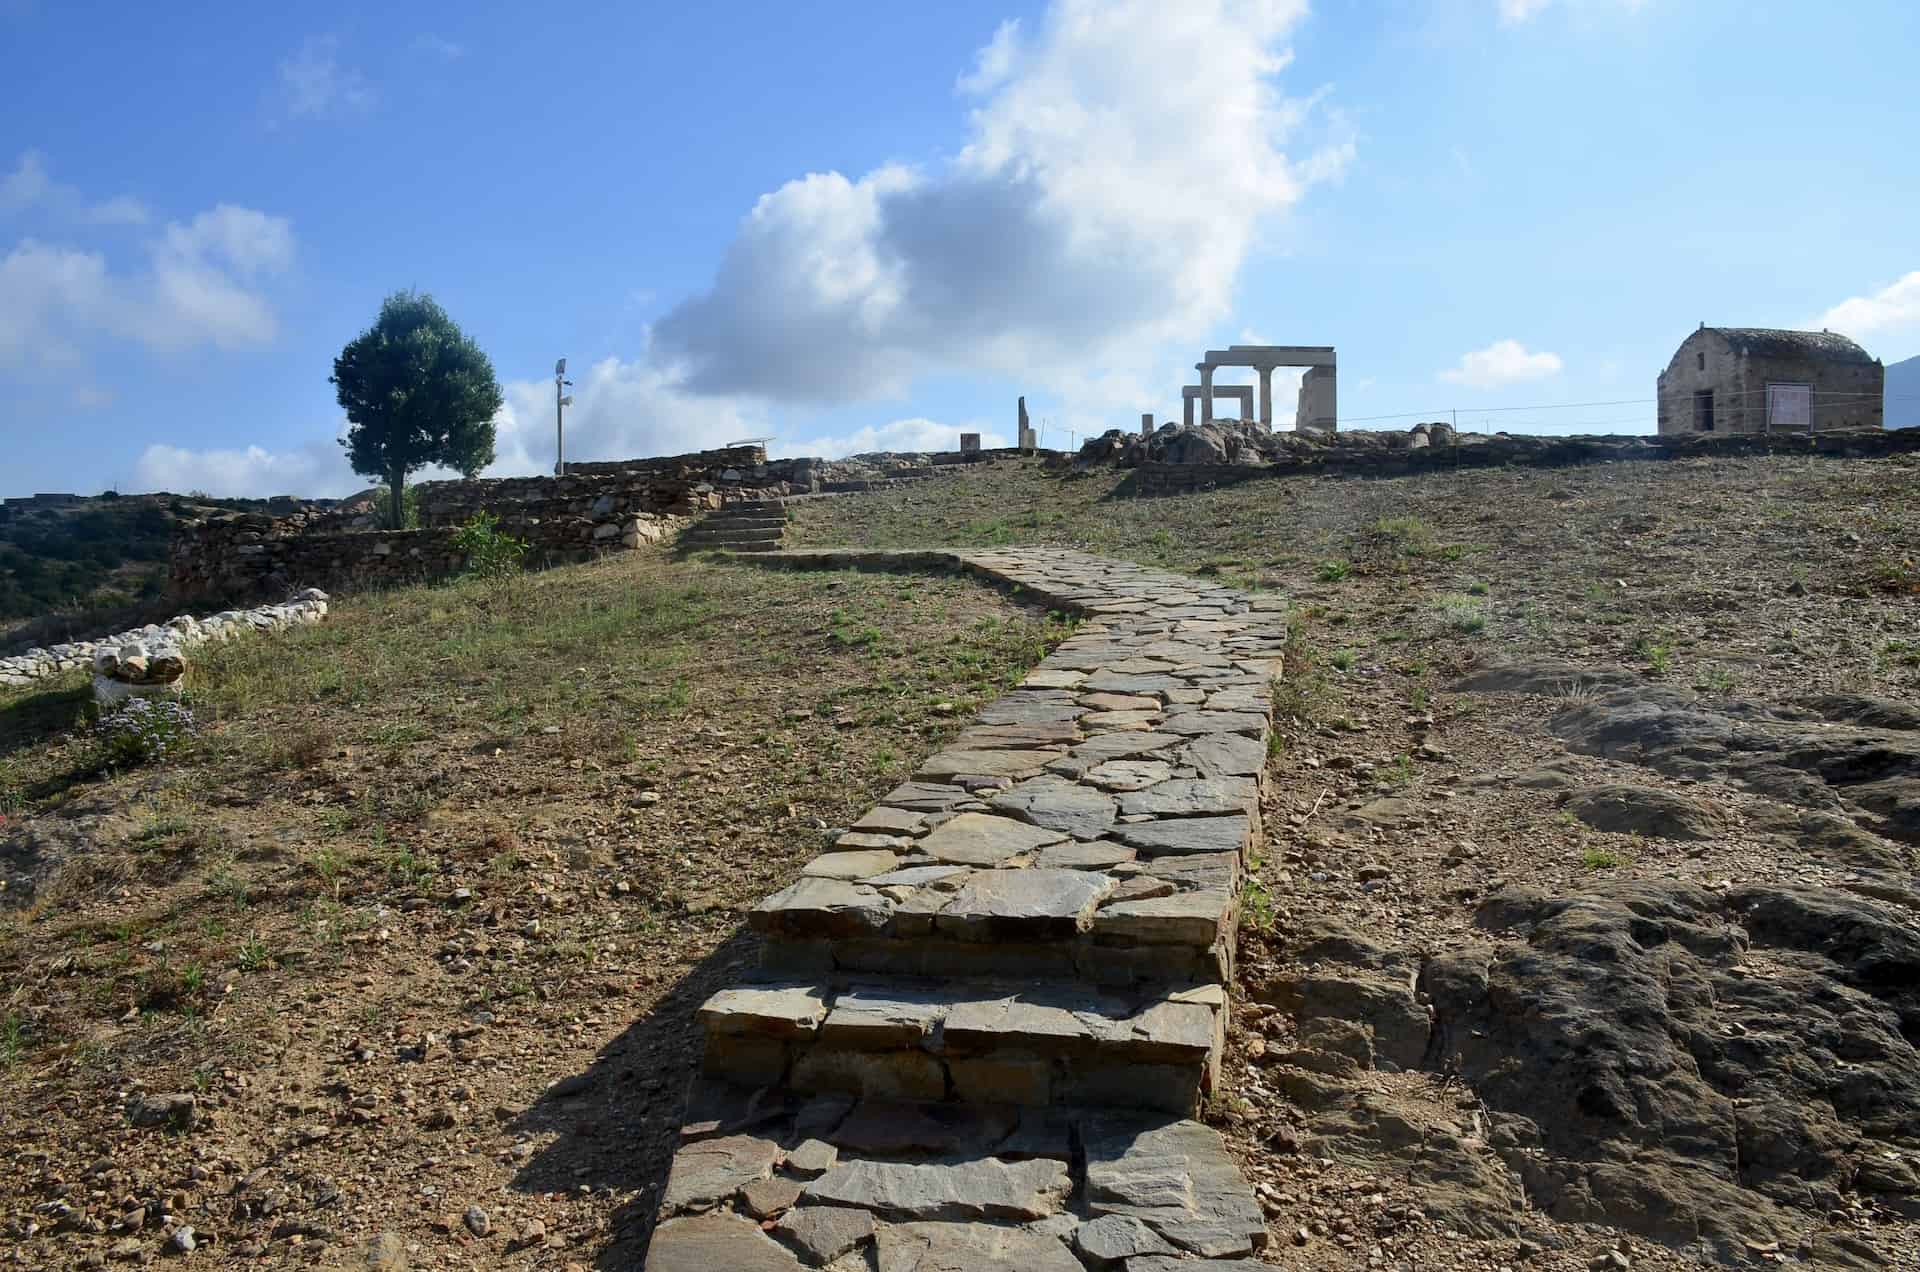 Walking up to the Temple of Demeter in Naxos, Greece